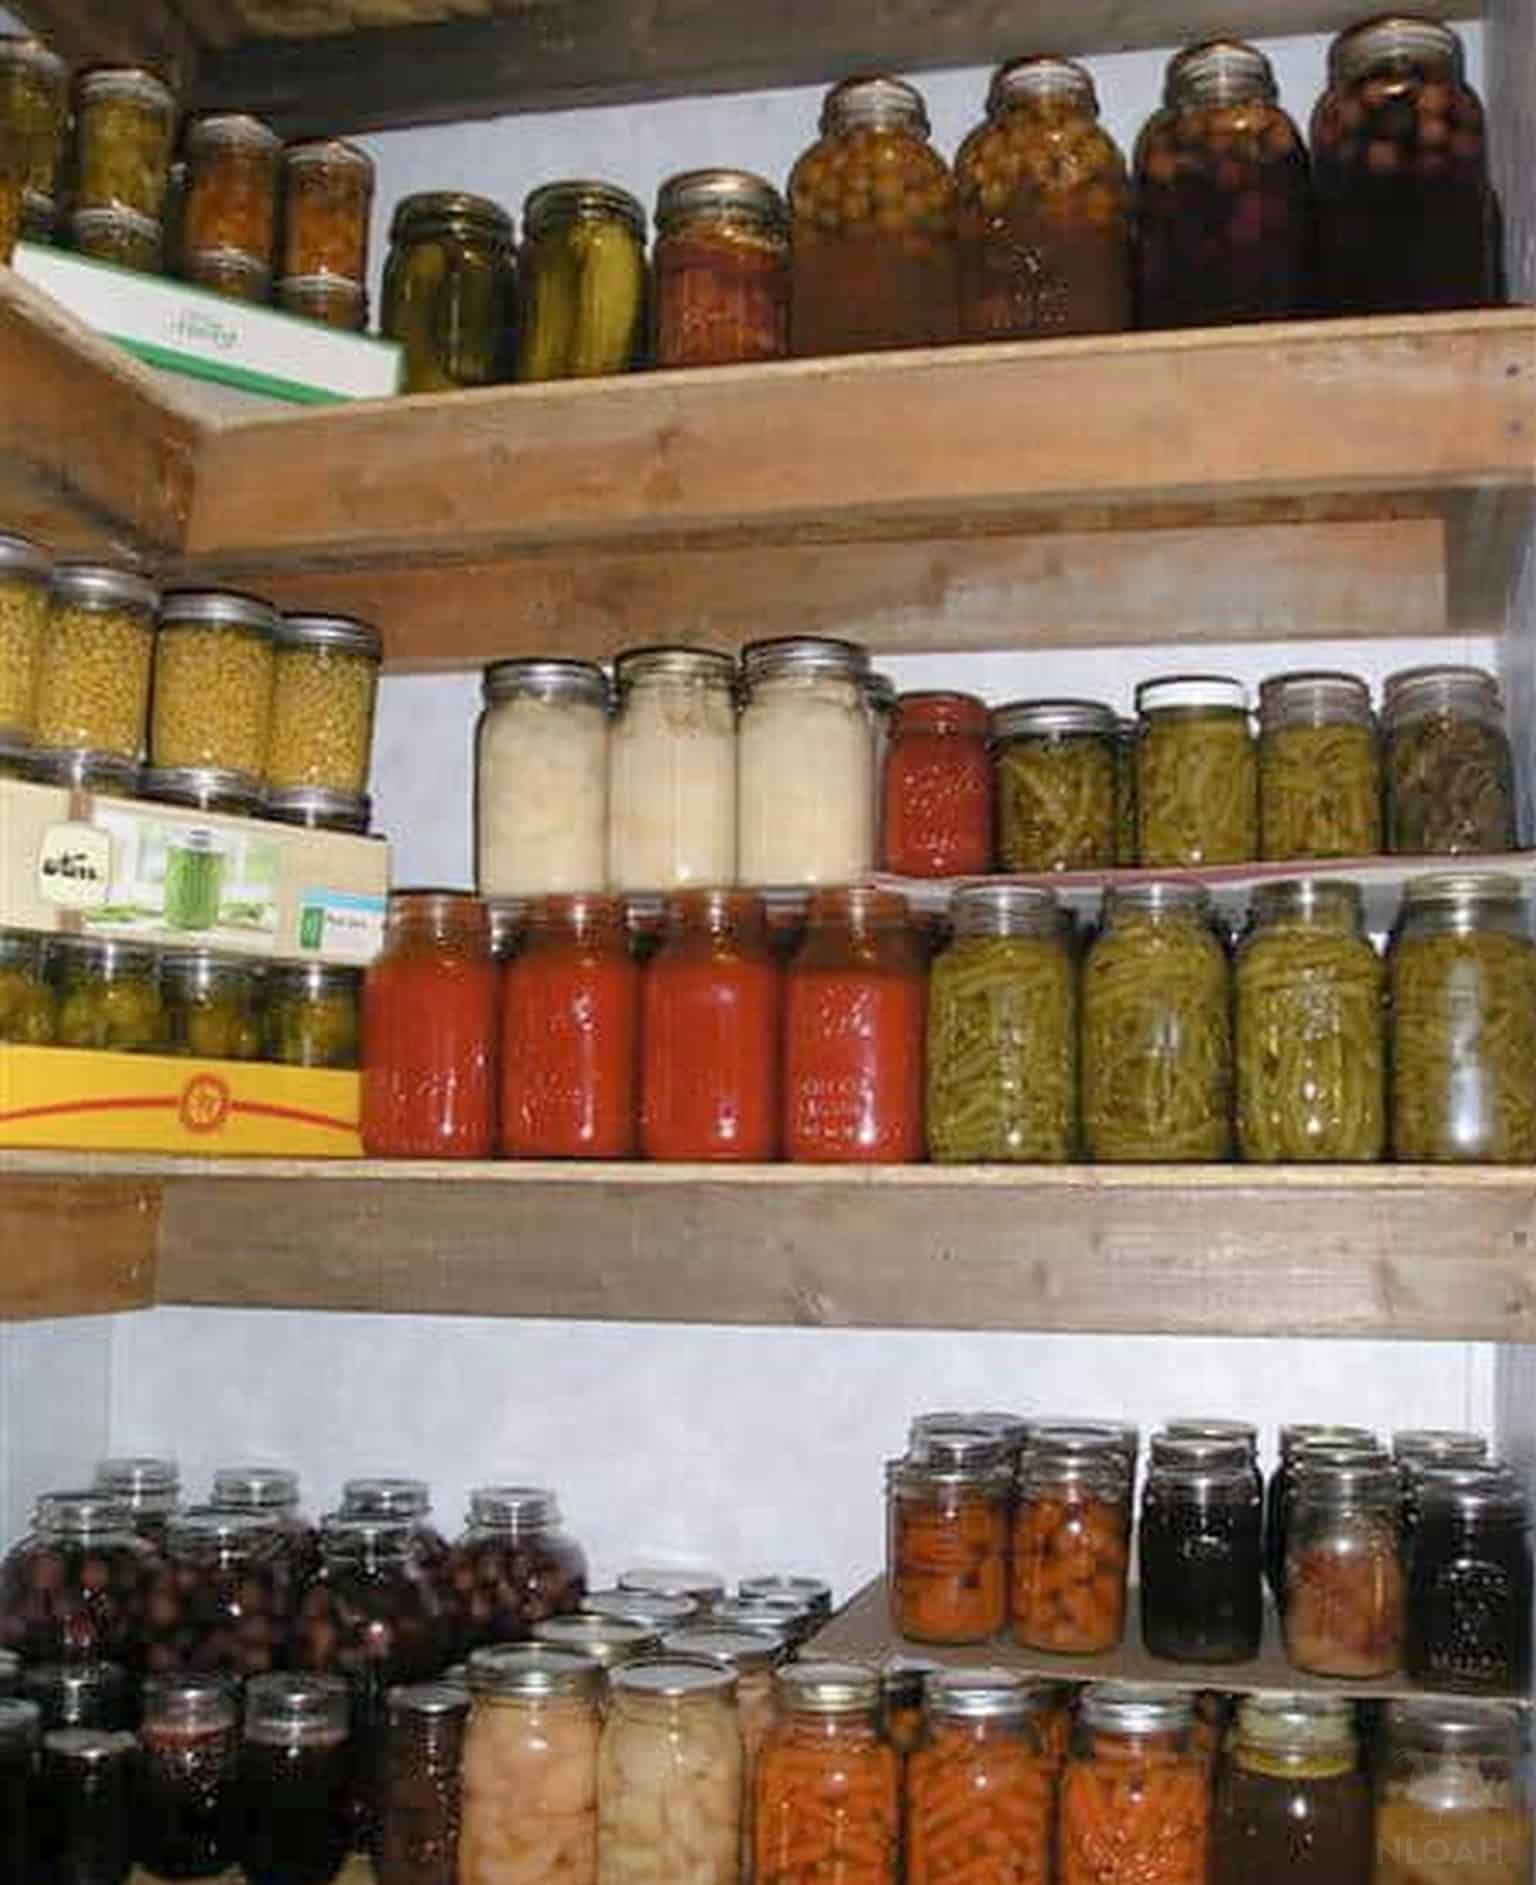 pantry shelves stocked with home canned goods